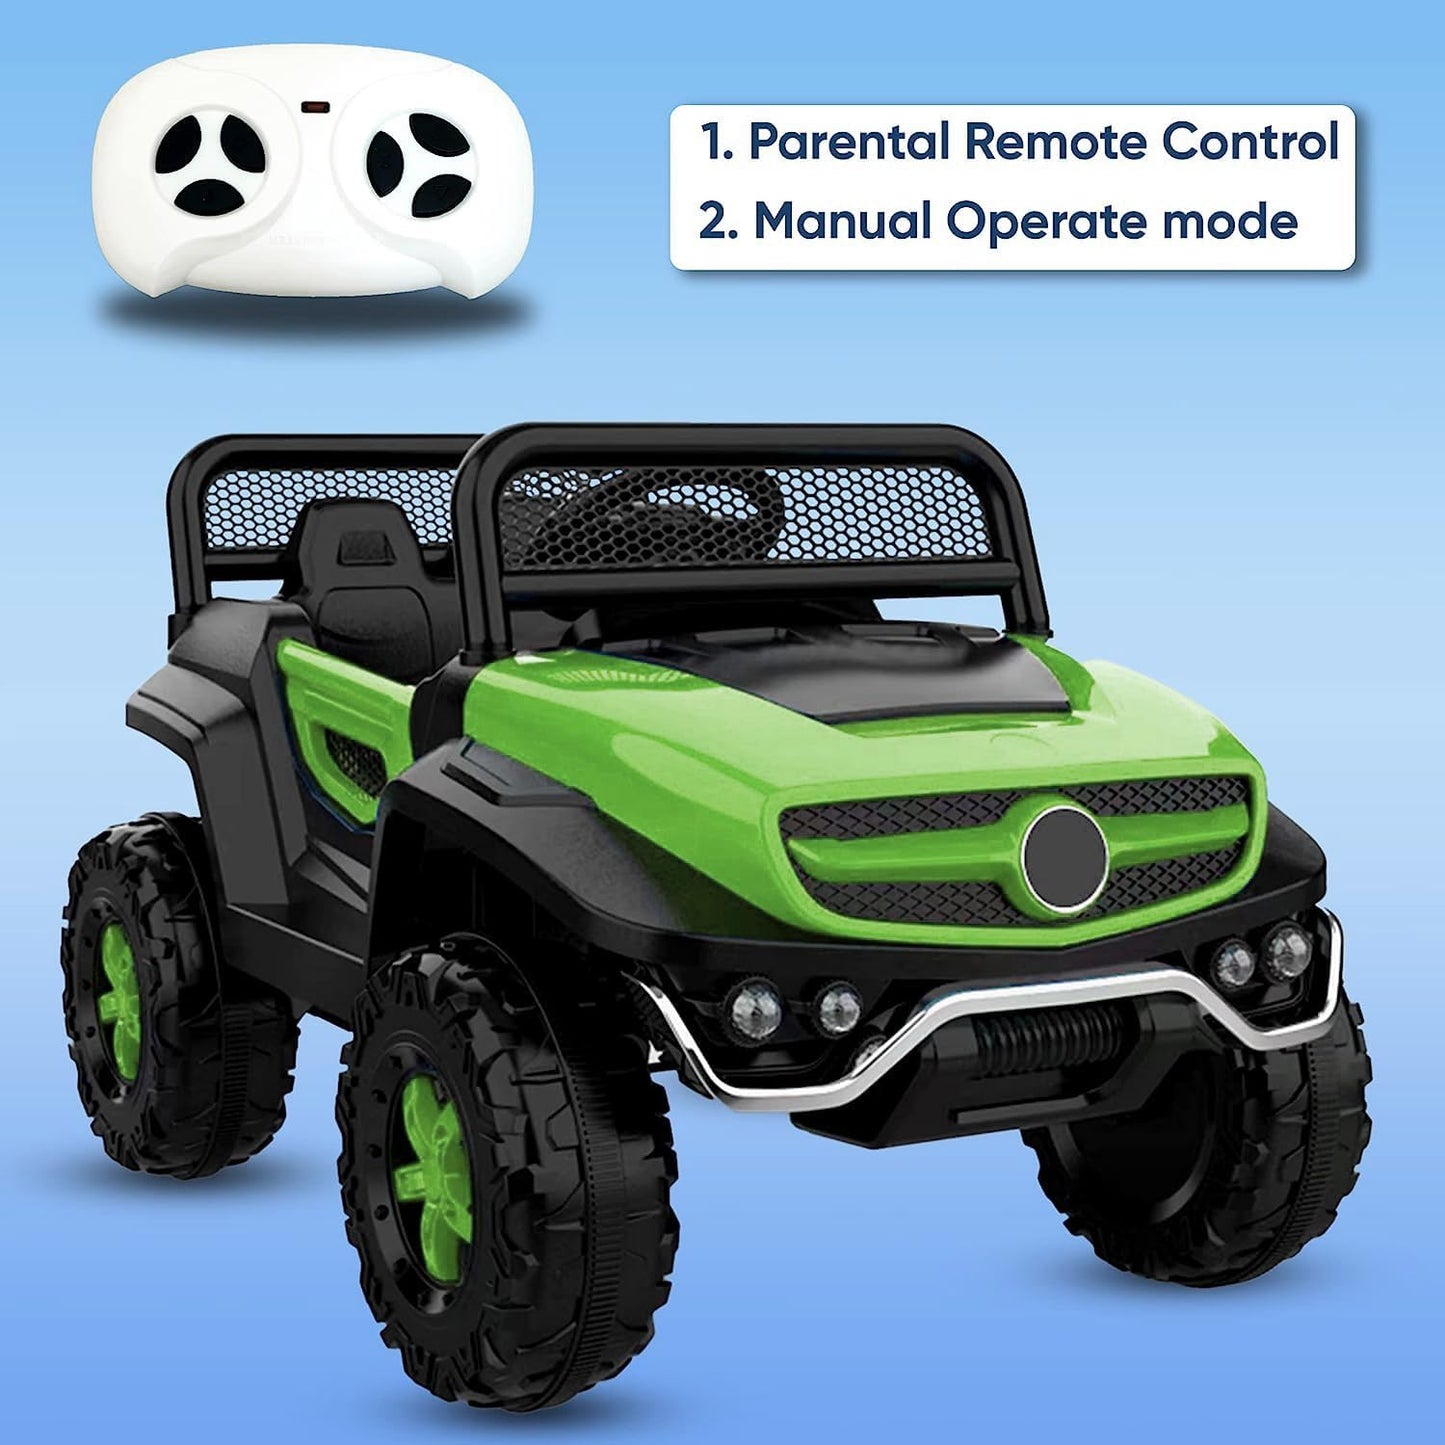 Letzride 2288 Battery Operated Ride on Jeep for Kids with Music, Lights and Swing- Electric Remote Control Ride on Jeep for Children to Drive of Age 1 to 6 Years-Green